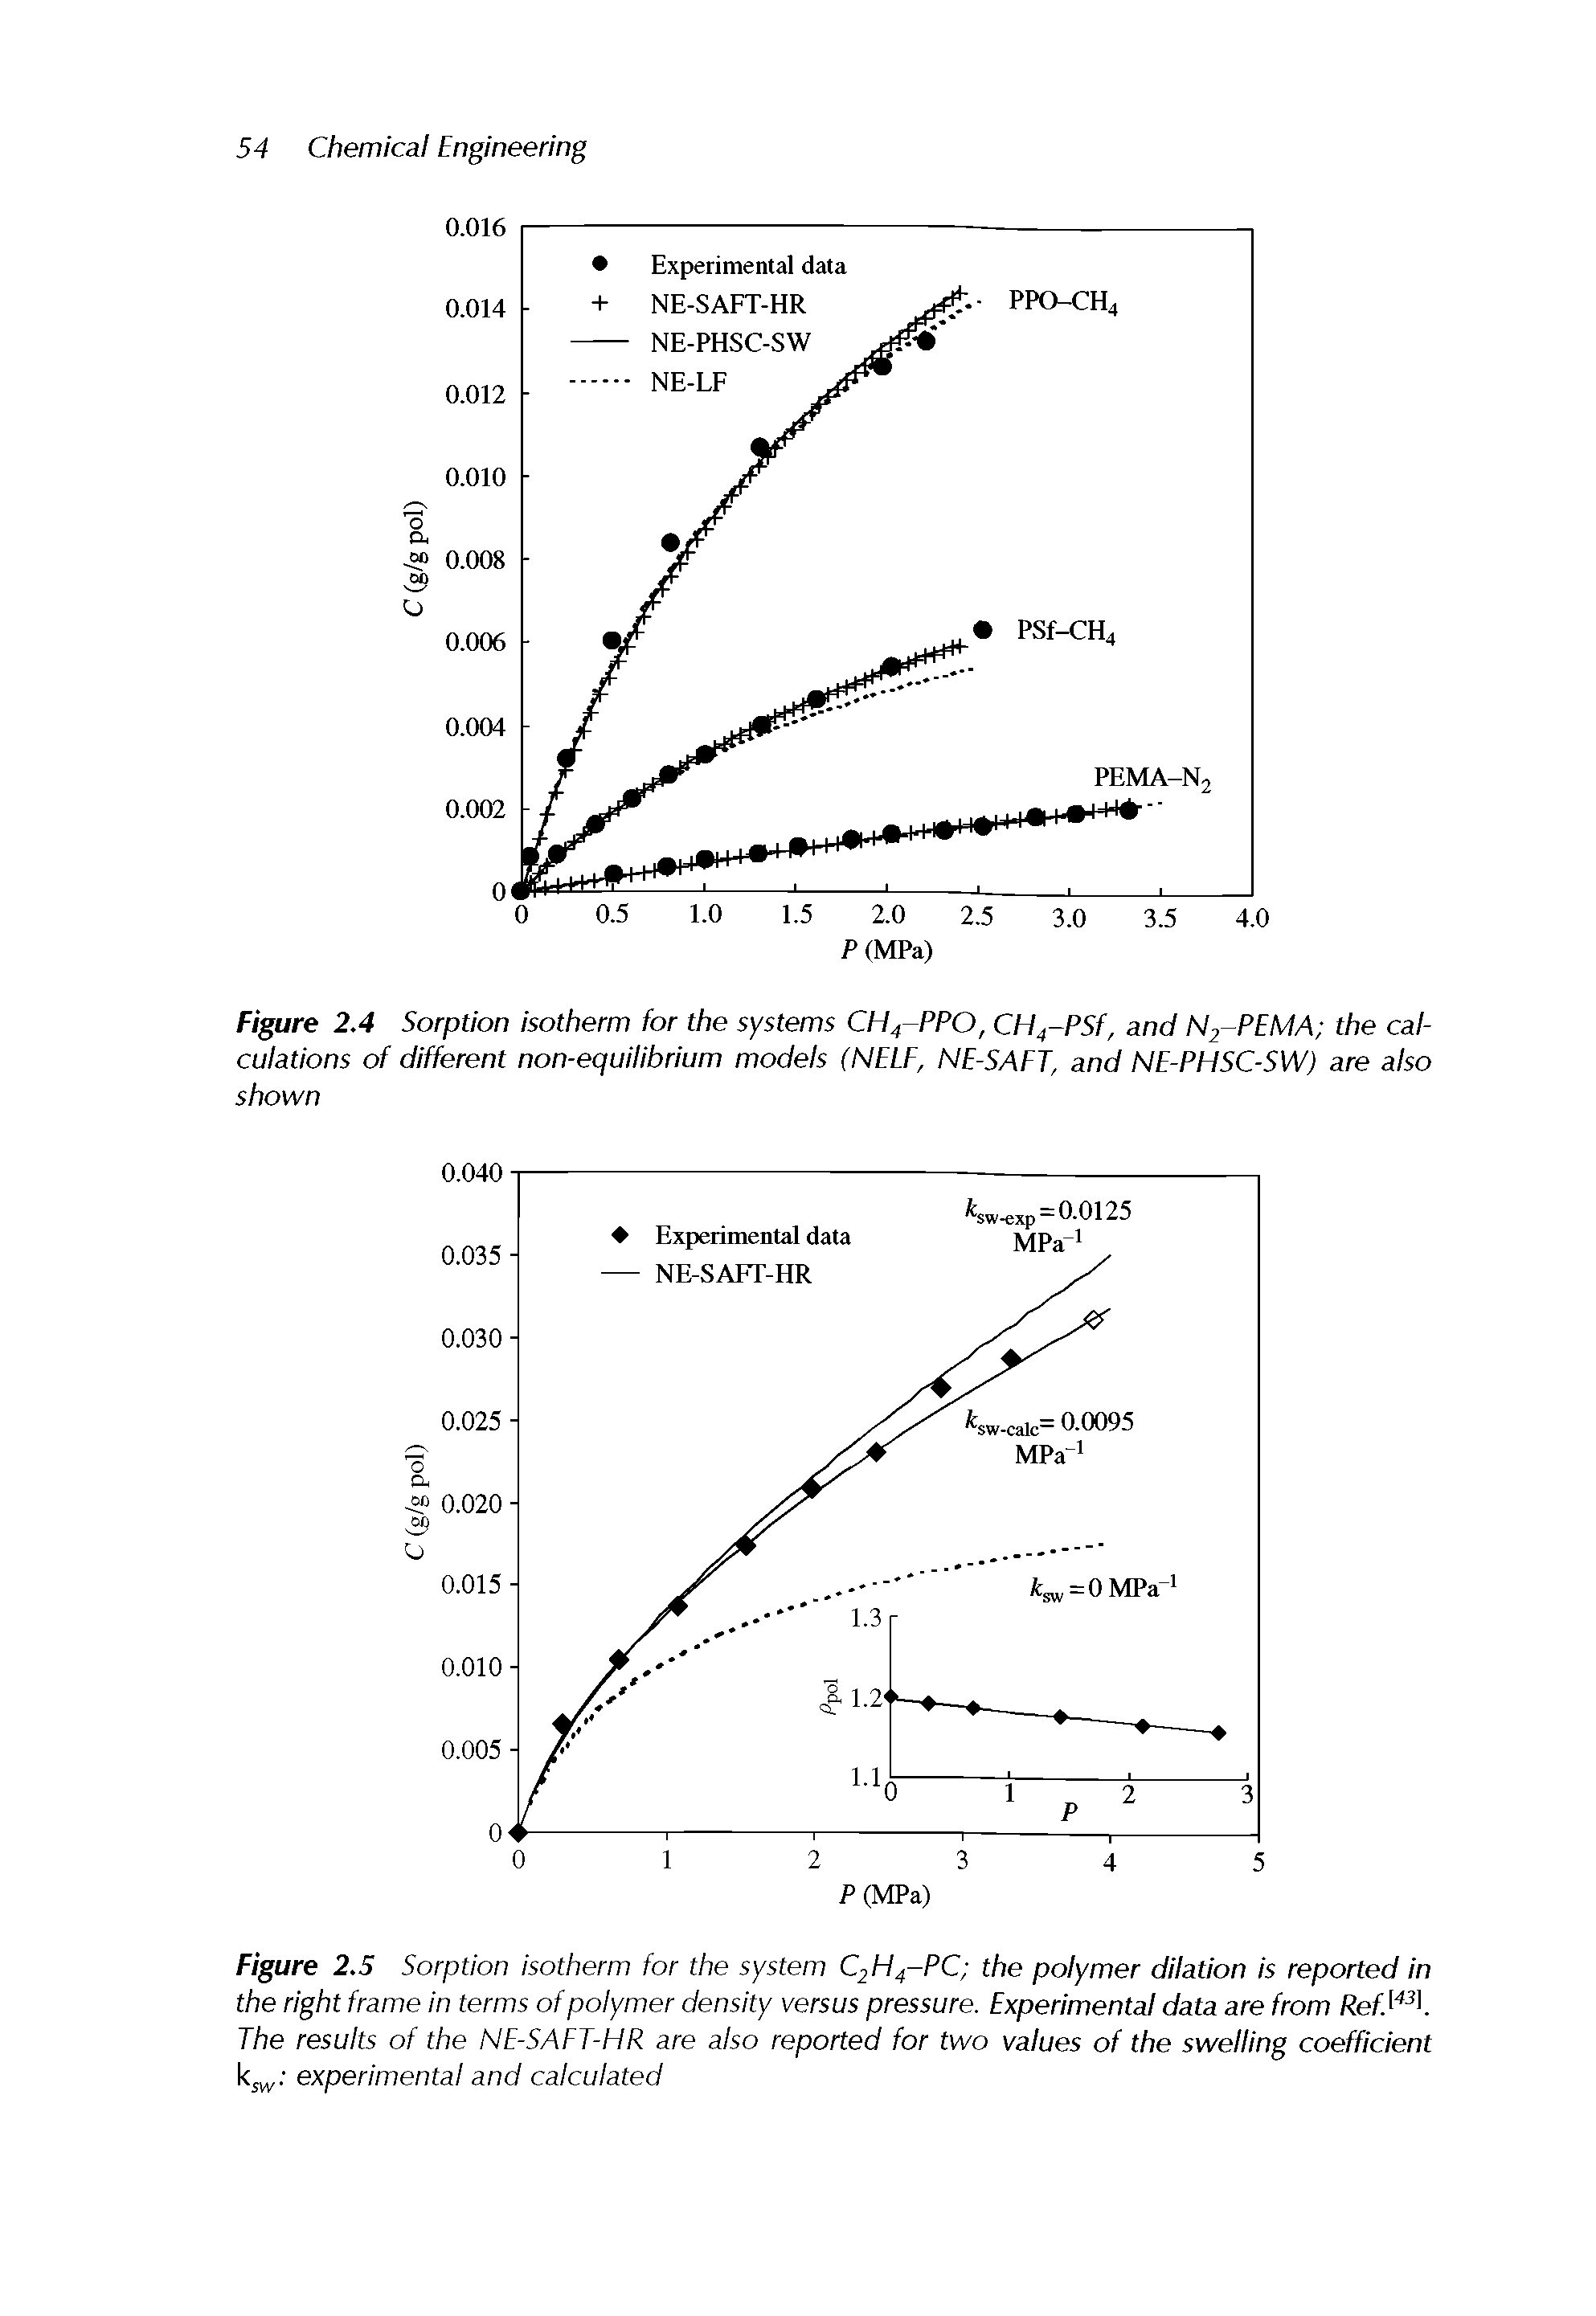 Figure 2.4 Sorption isotherm for the systems CH4-PPO, CH4 PSf, and N2-PEMA the calculations of different non-equilibrium models (NELE, NE-SAFT, and NE-PHSC-SW) are also shown...